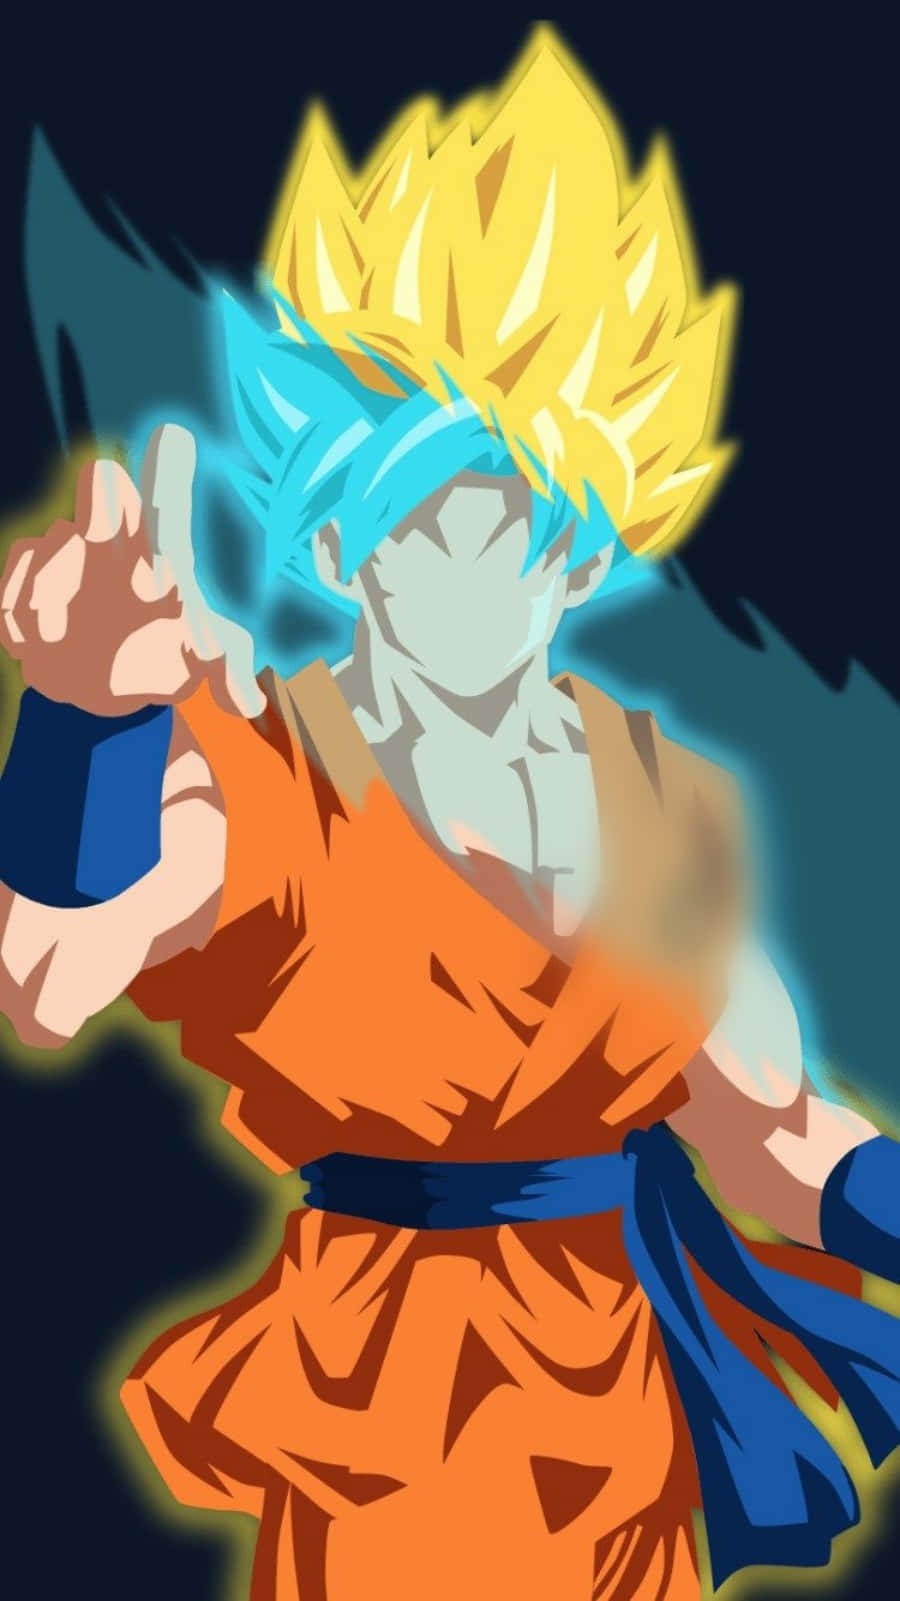 Get Ready To Unlock Incredible Powers with the Dragon Ball Super Iphone Wallpaper